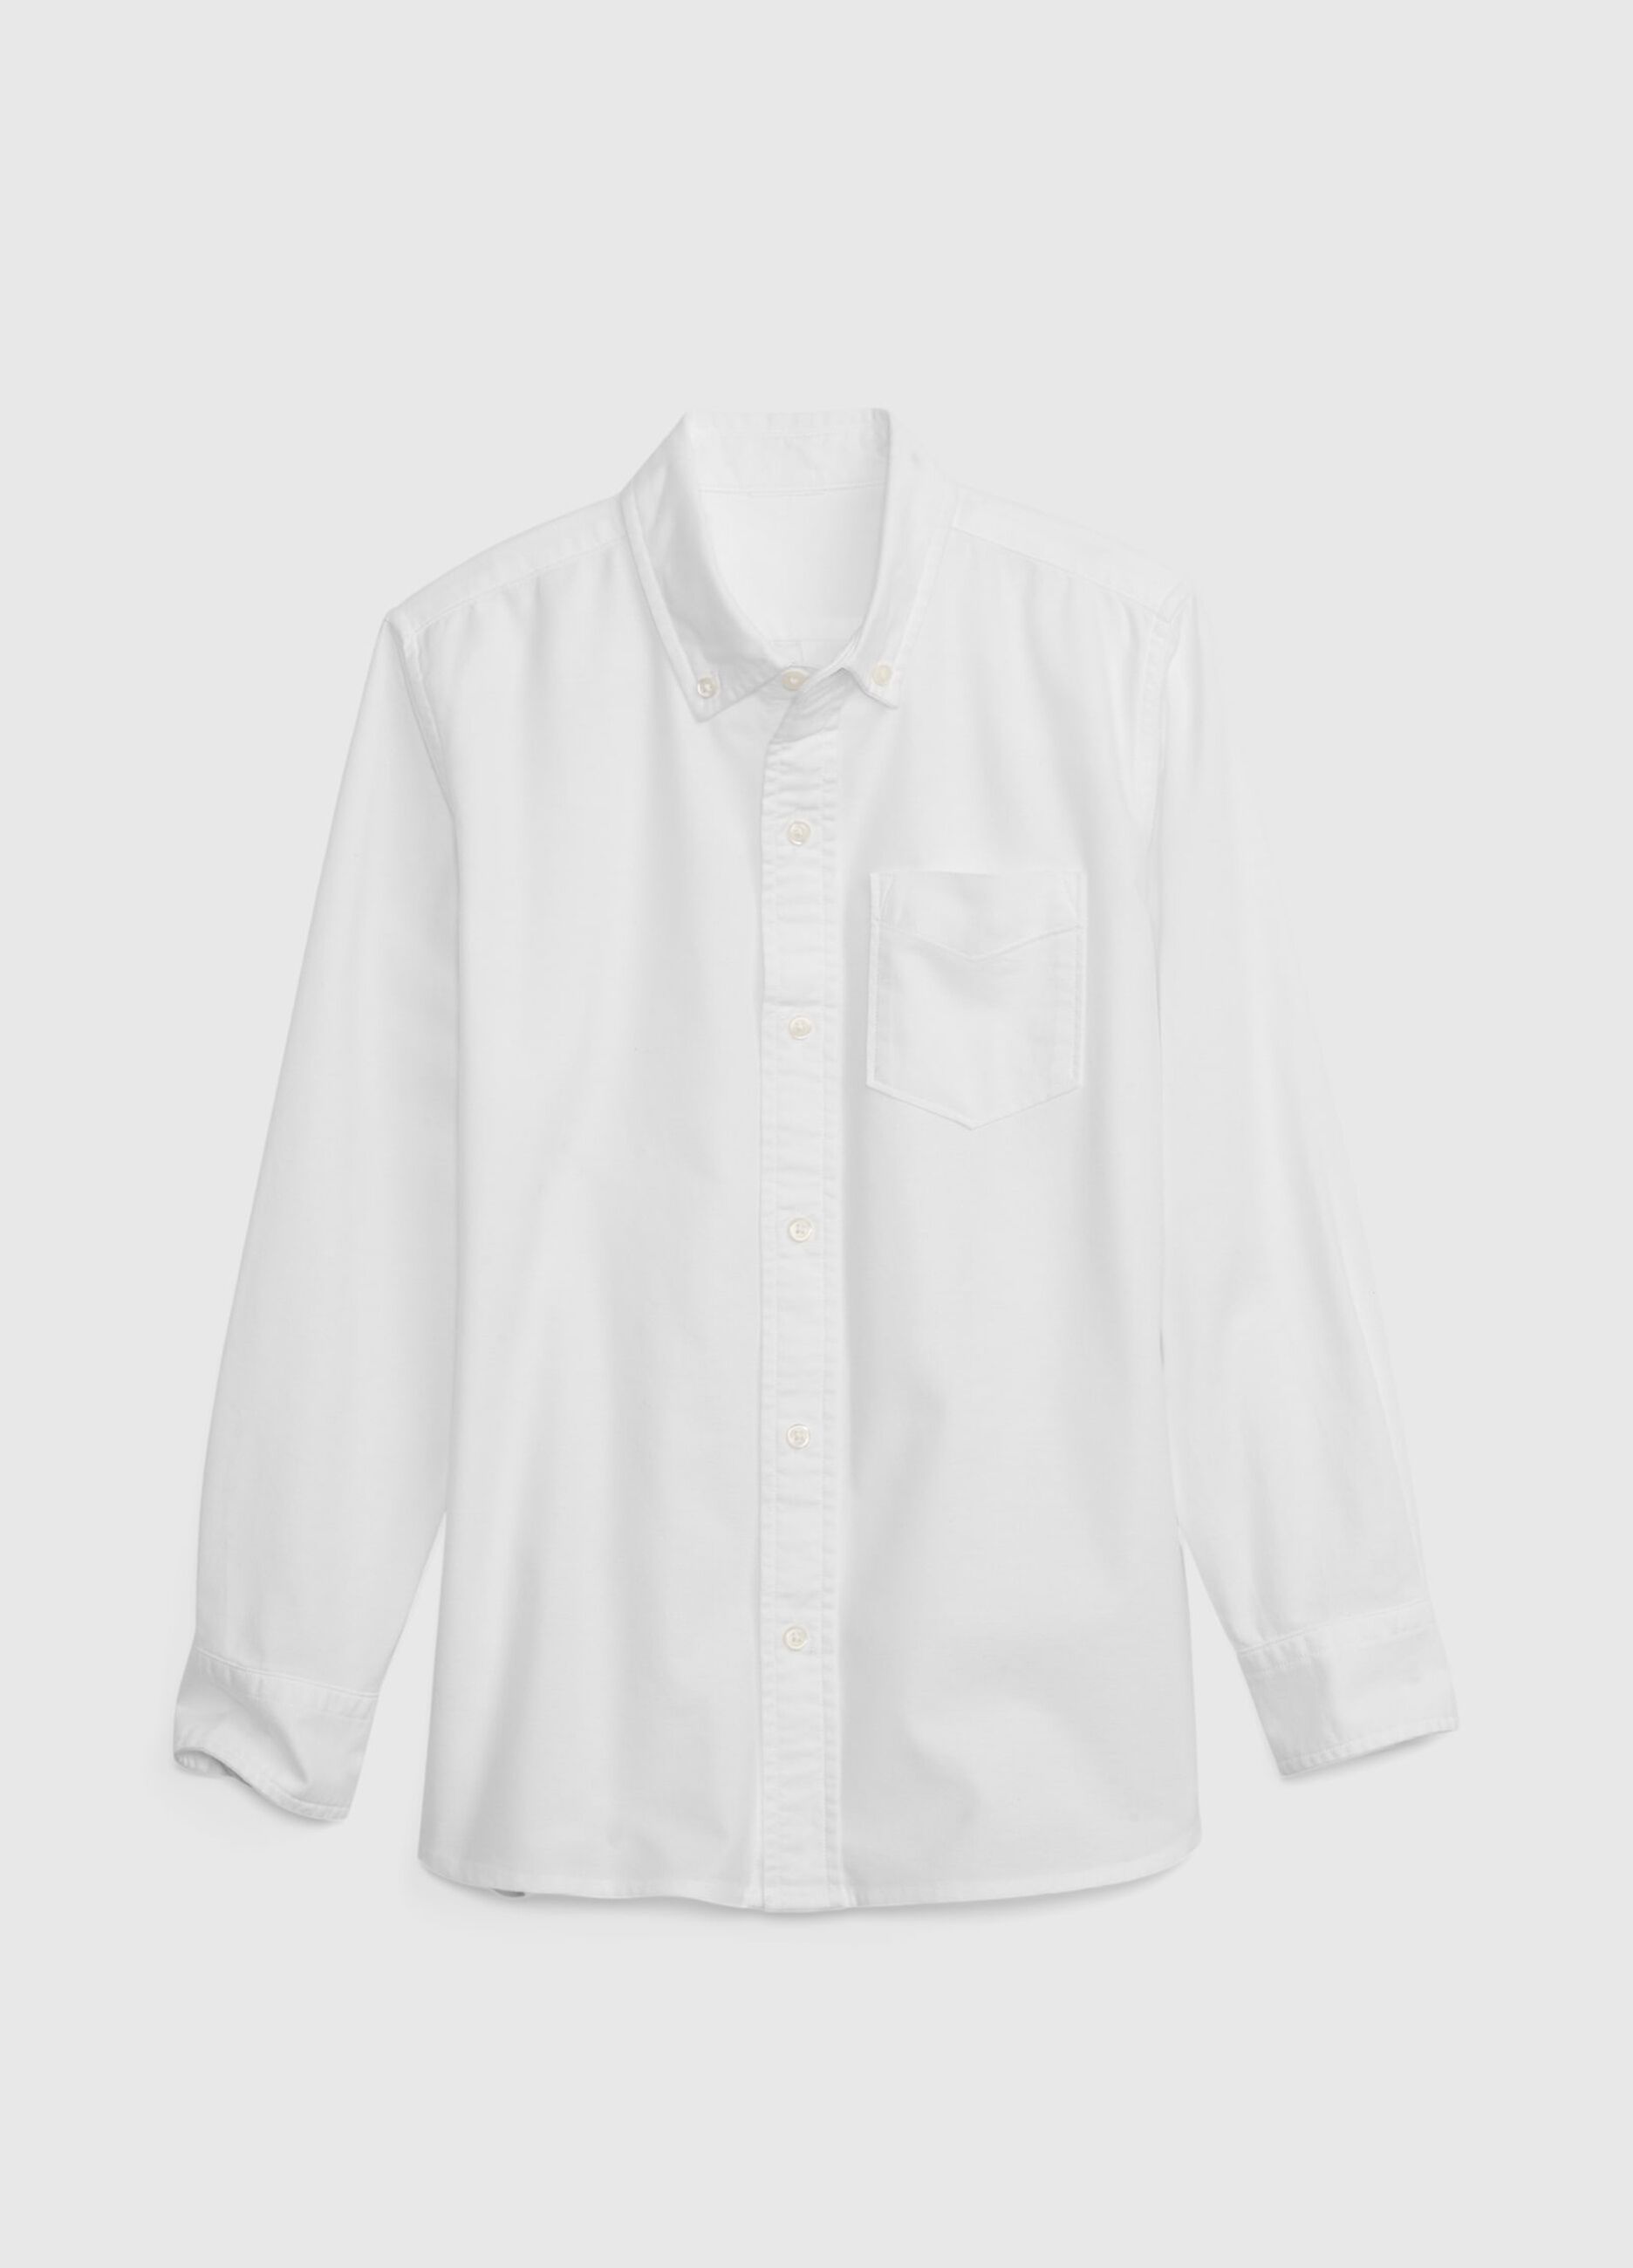 Oxford shirt with pocket